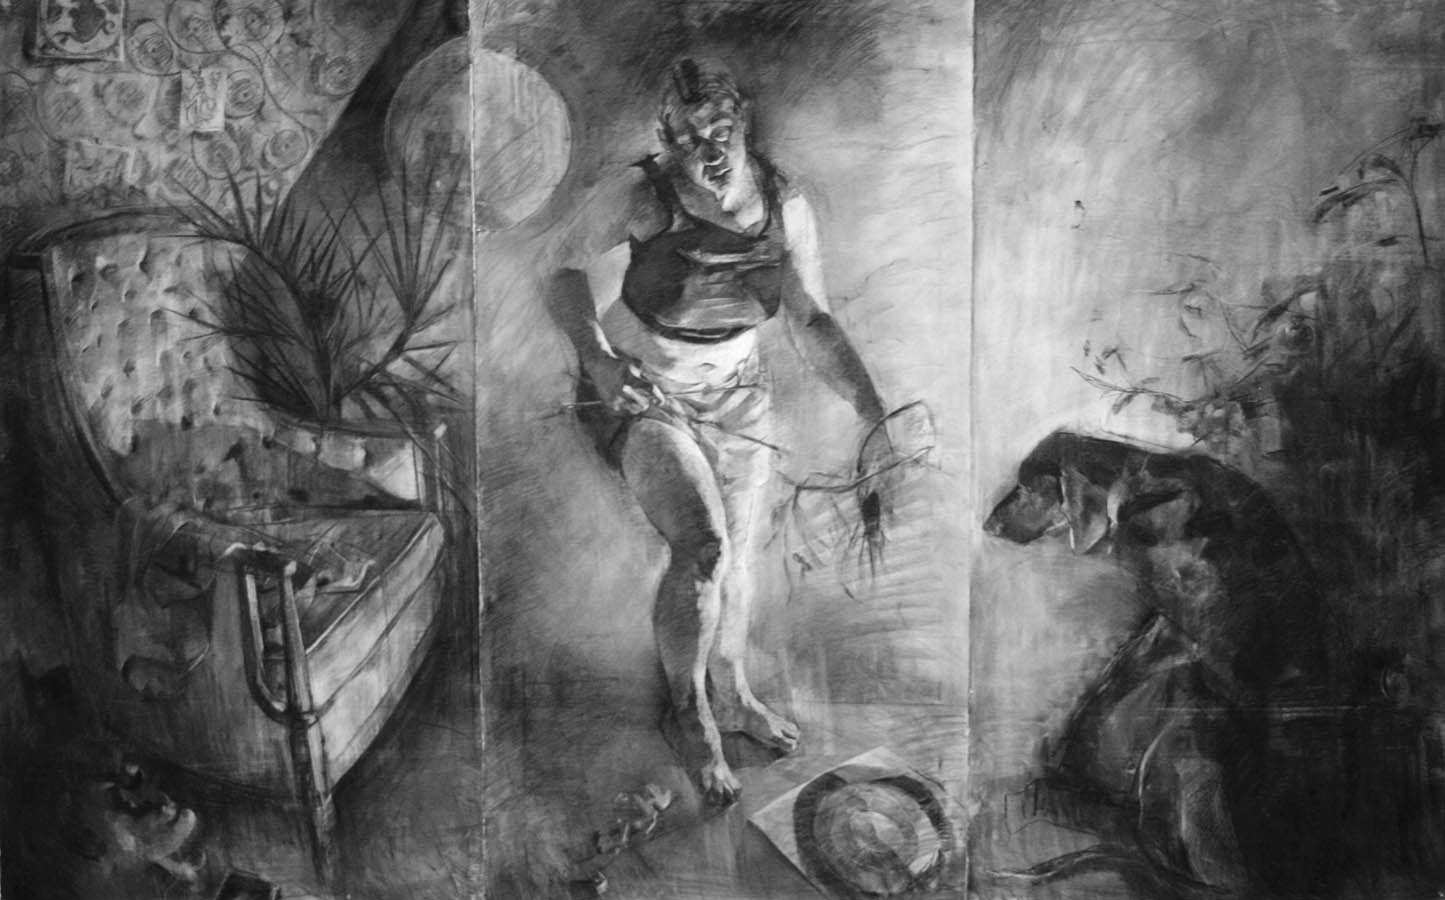 Wild Domestic, 2015, charcoal on Arches, 72” x 144”